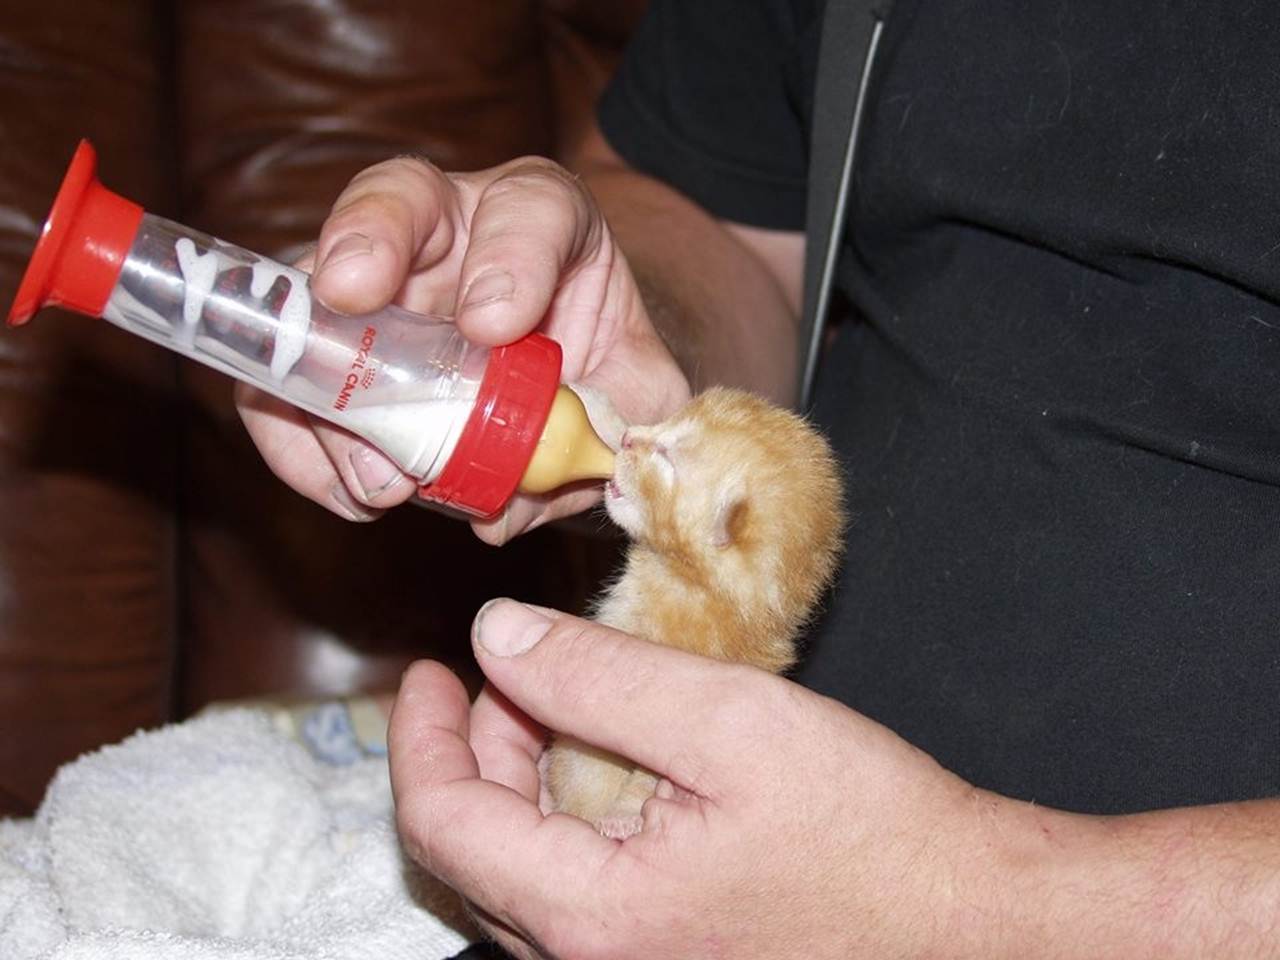 Small kitten being fed with a Royal Canin bottle